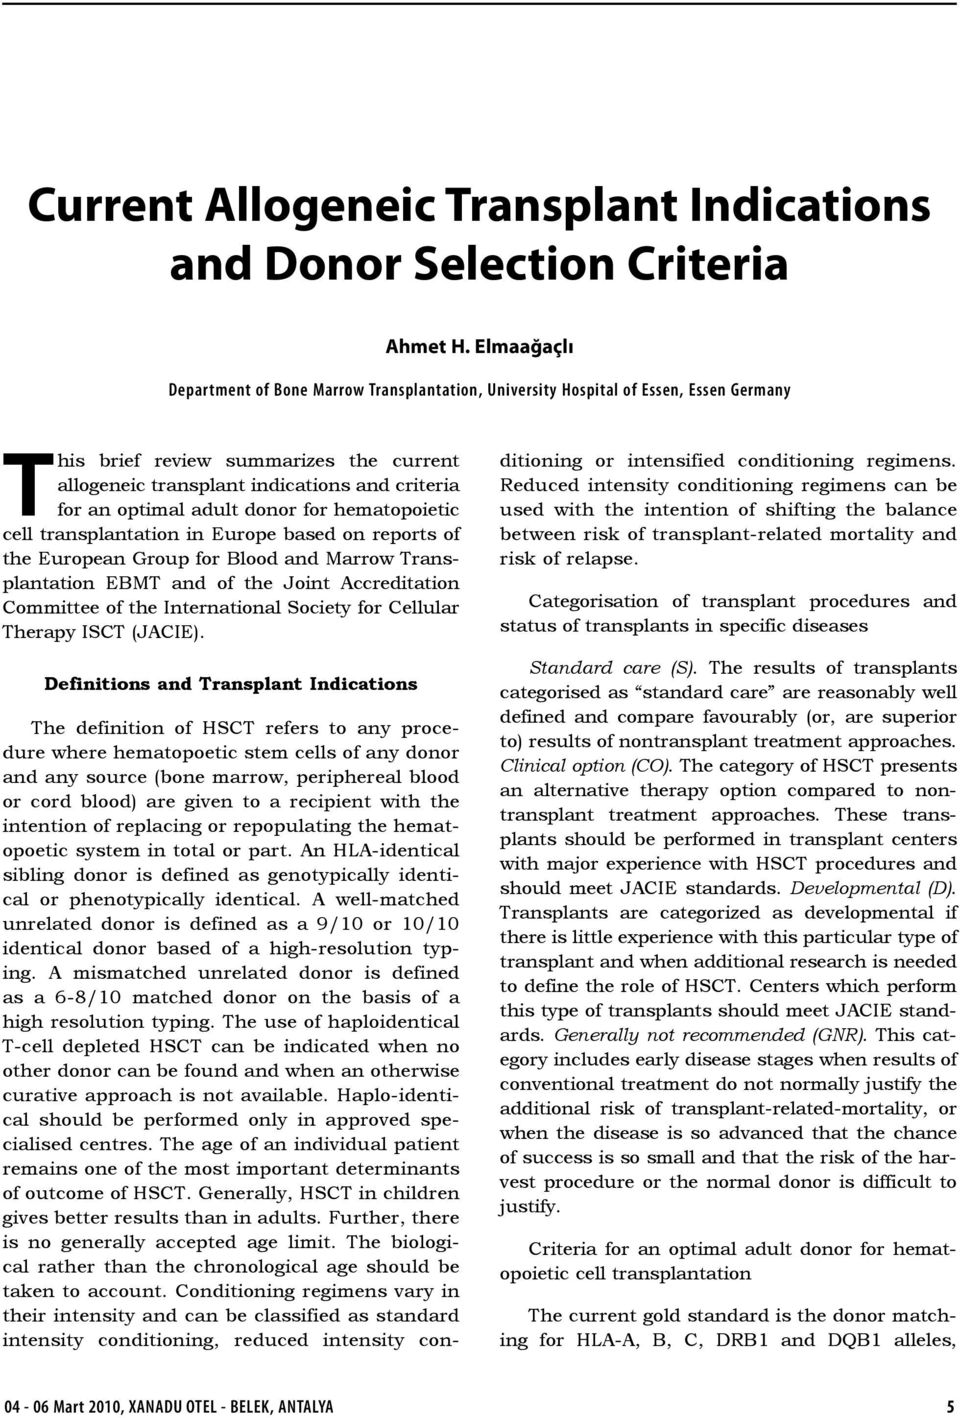 optimal adult donor for hematopoietic cell transplantation in Europe based on reports of the European Group for Blood and Marrow Transplantation EBMT and of the Joint Accreditation Committee of the